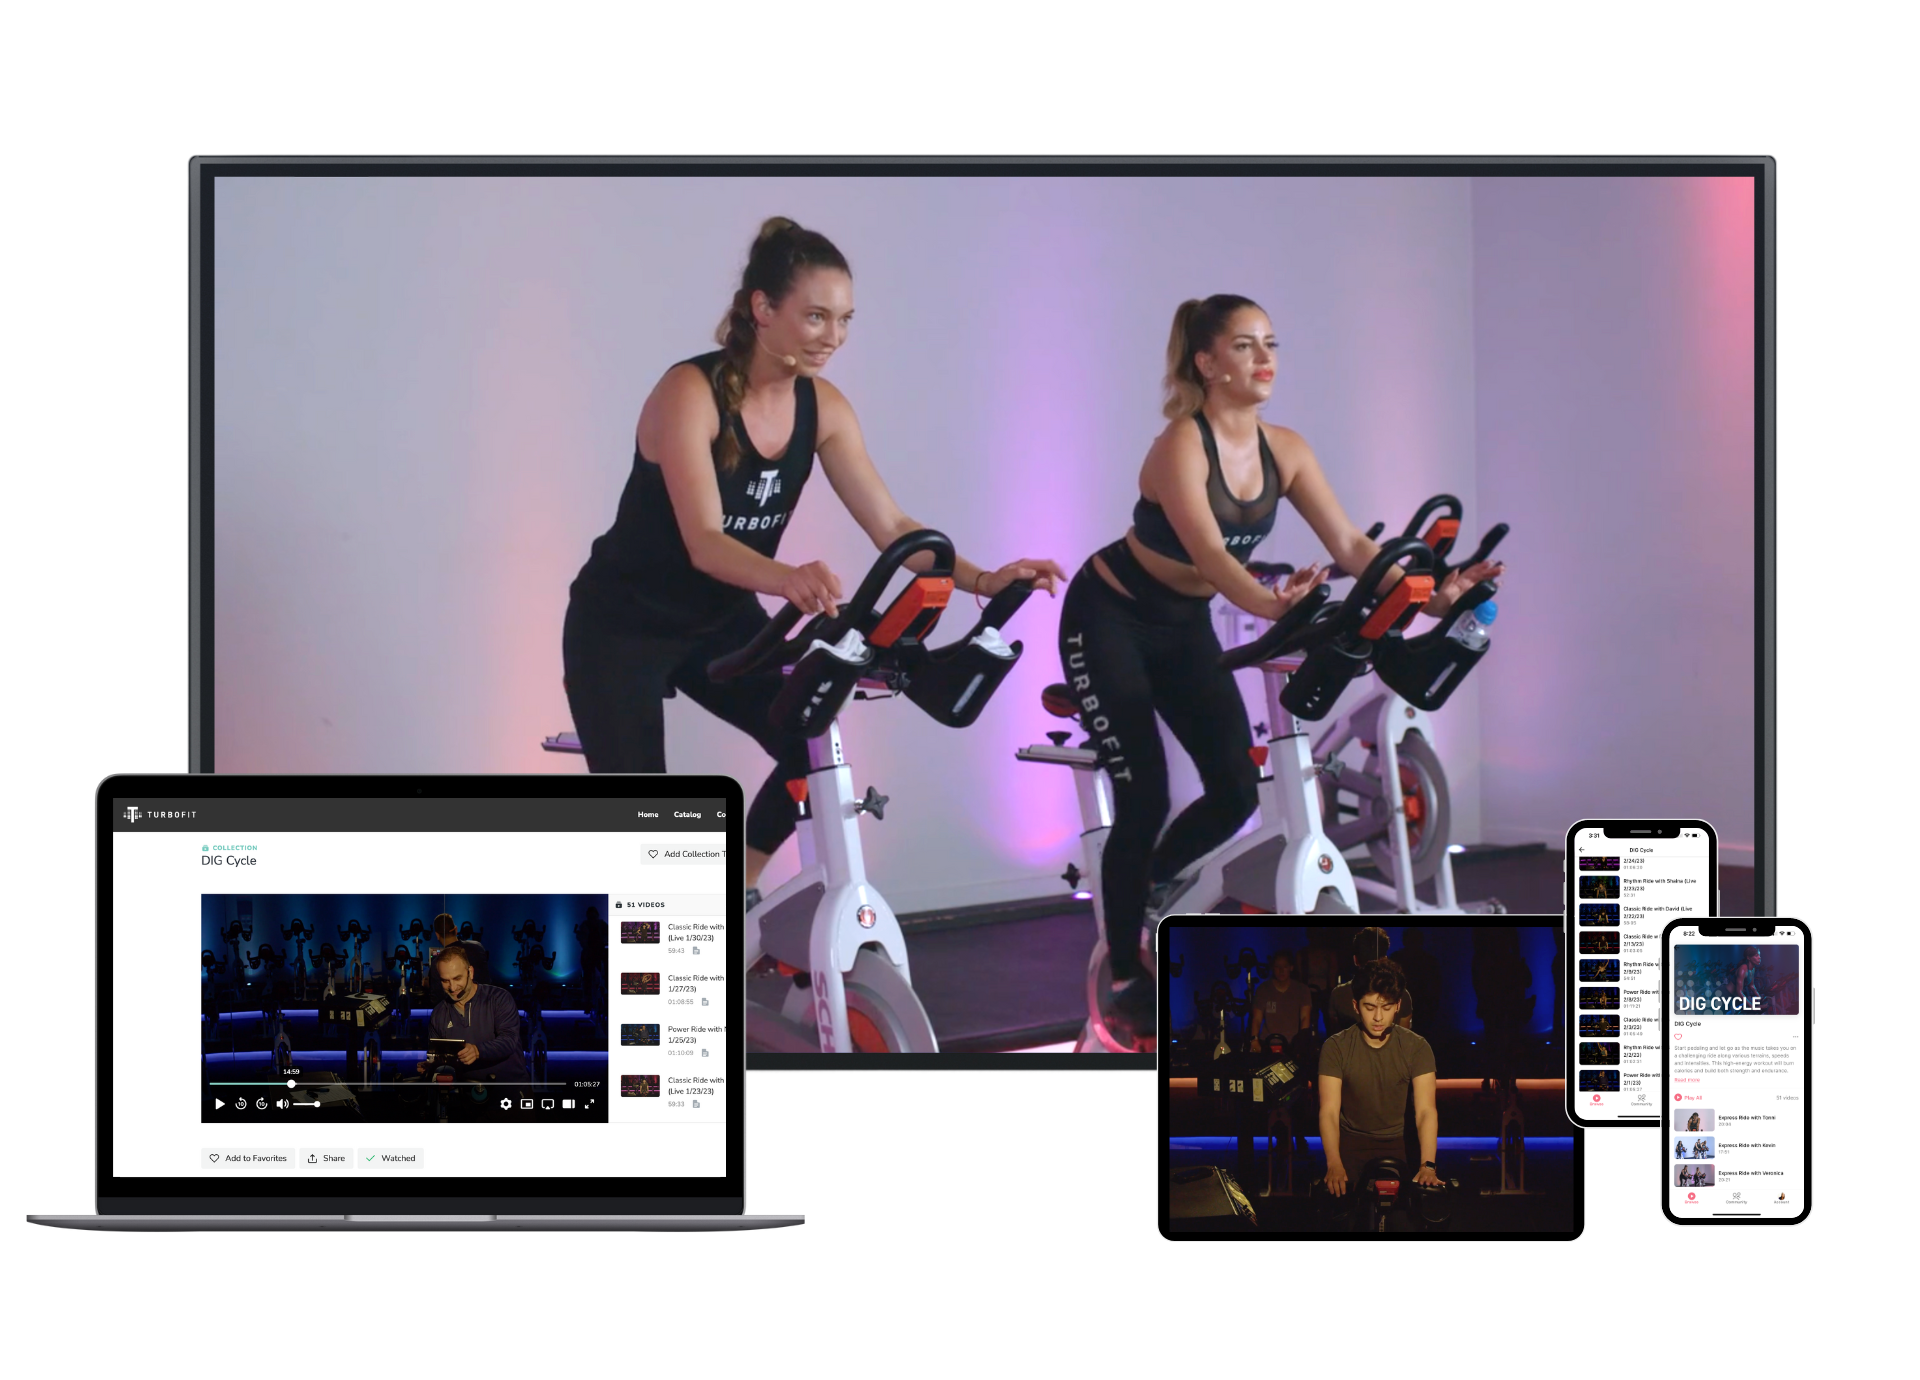 TurboFit — DIG Indoor Cycling + Strength